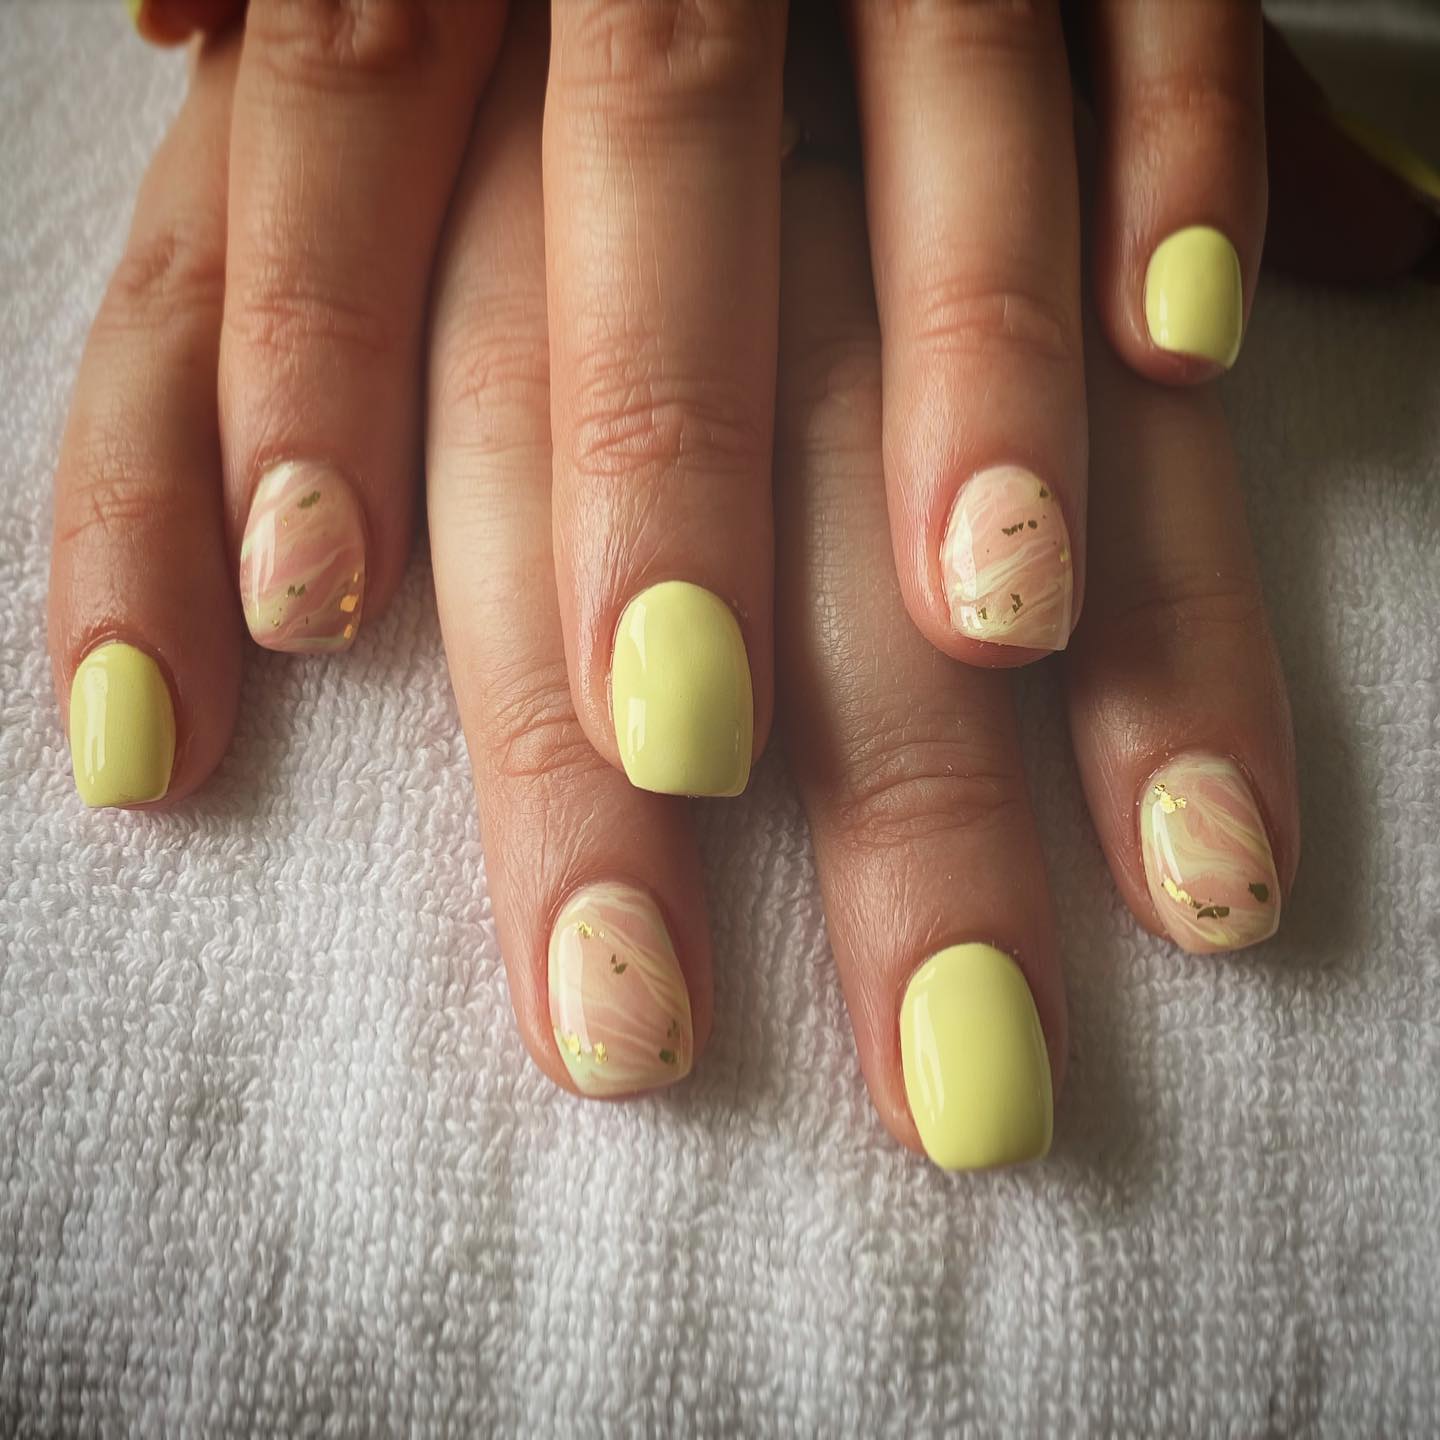 Gorgeous yellow nail art designs you need to try this summer